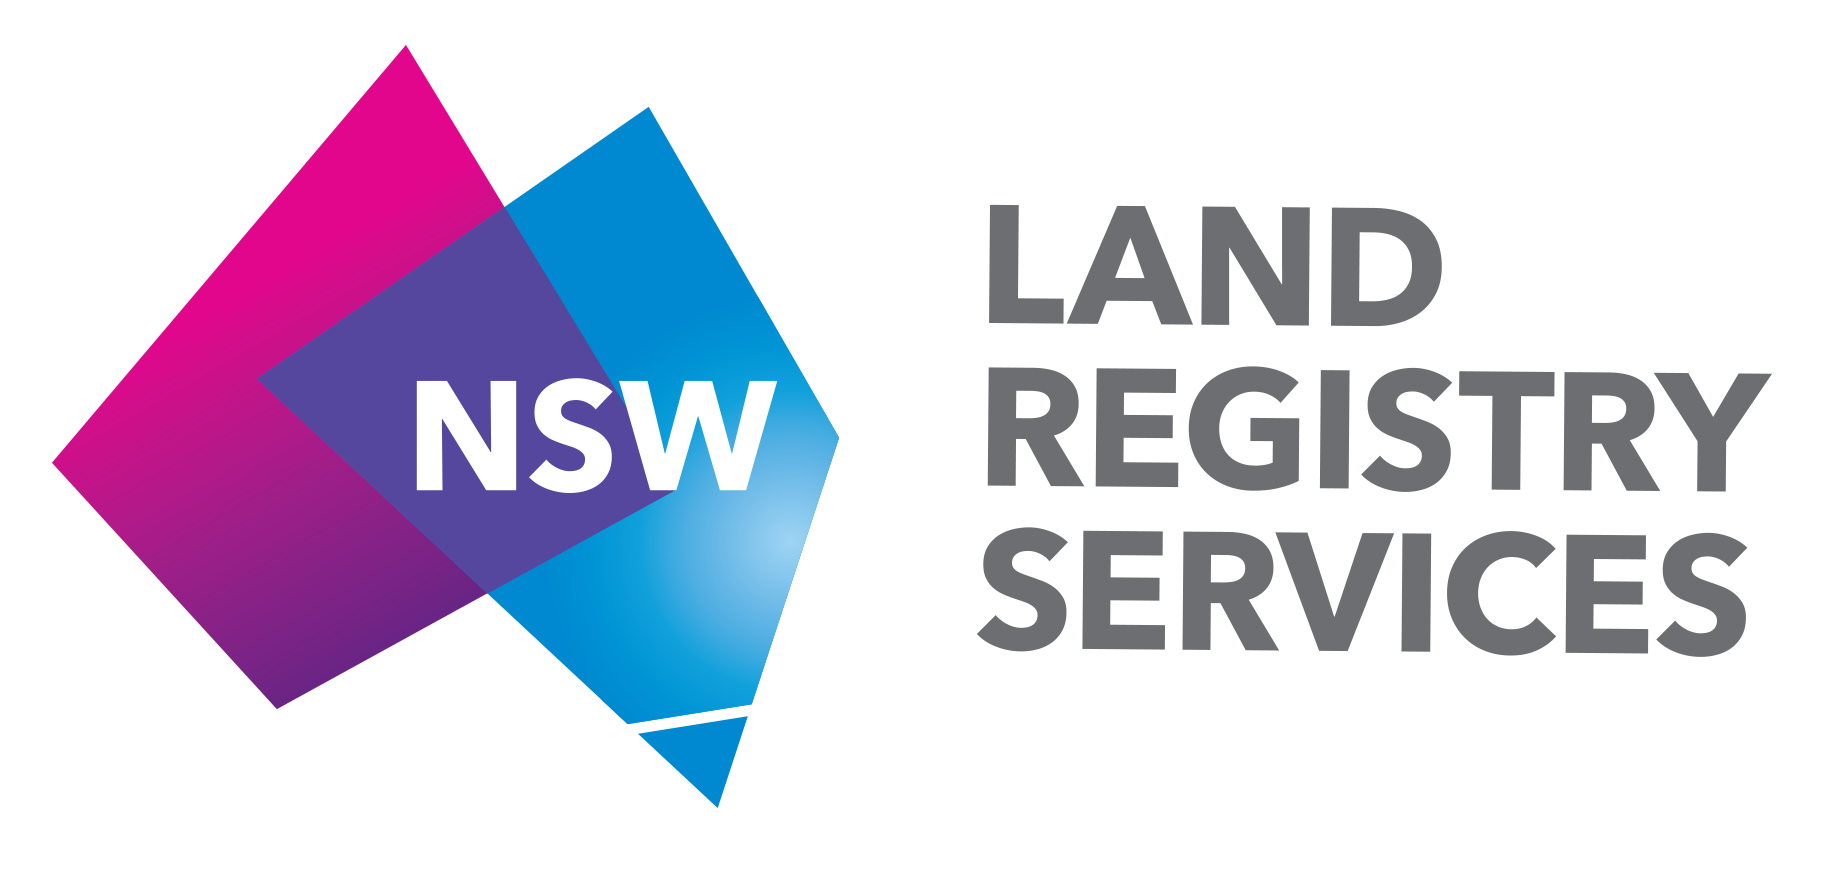 NSW Land Registry Services